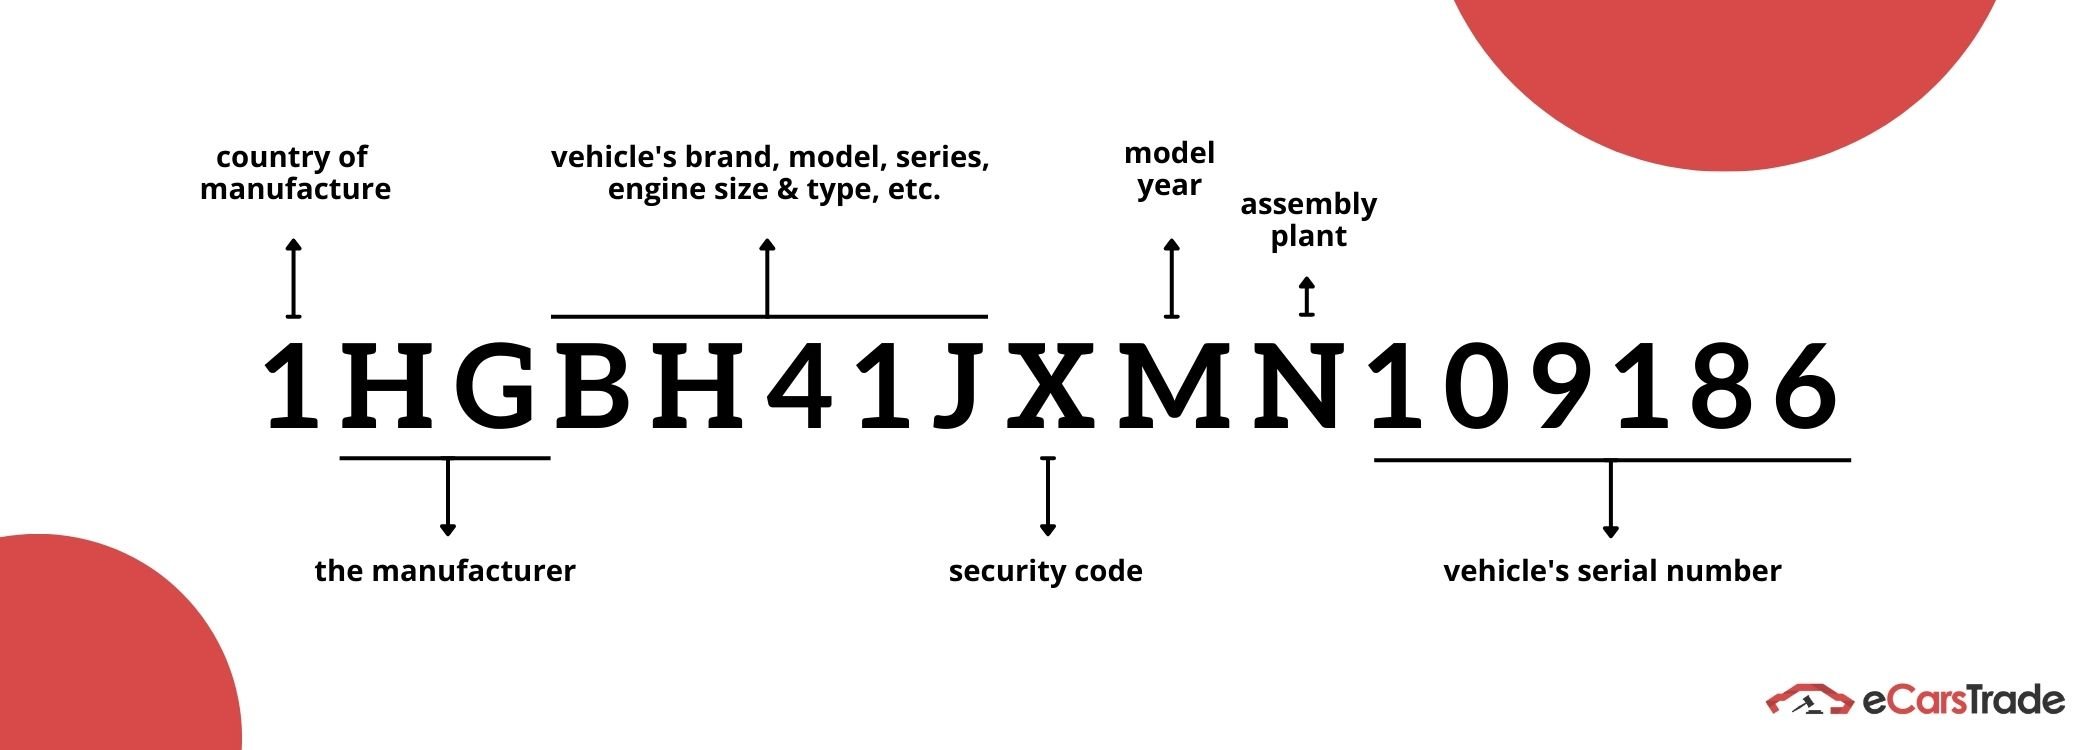 eCarsTrade infographic showing the meaning of a VIN number